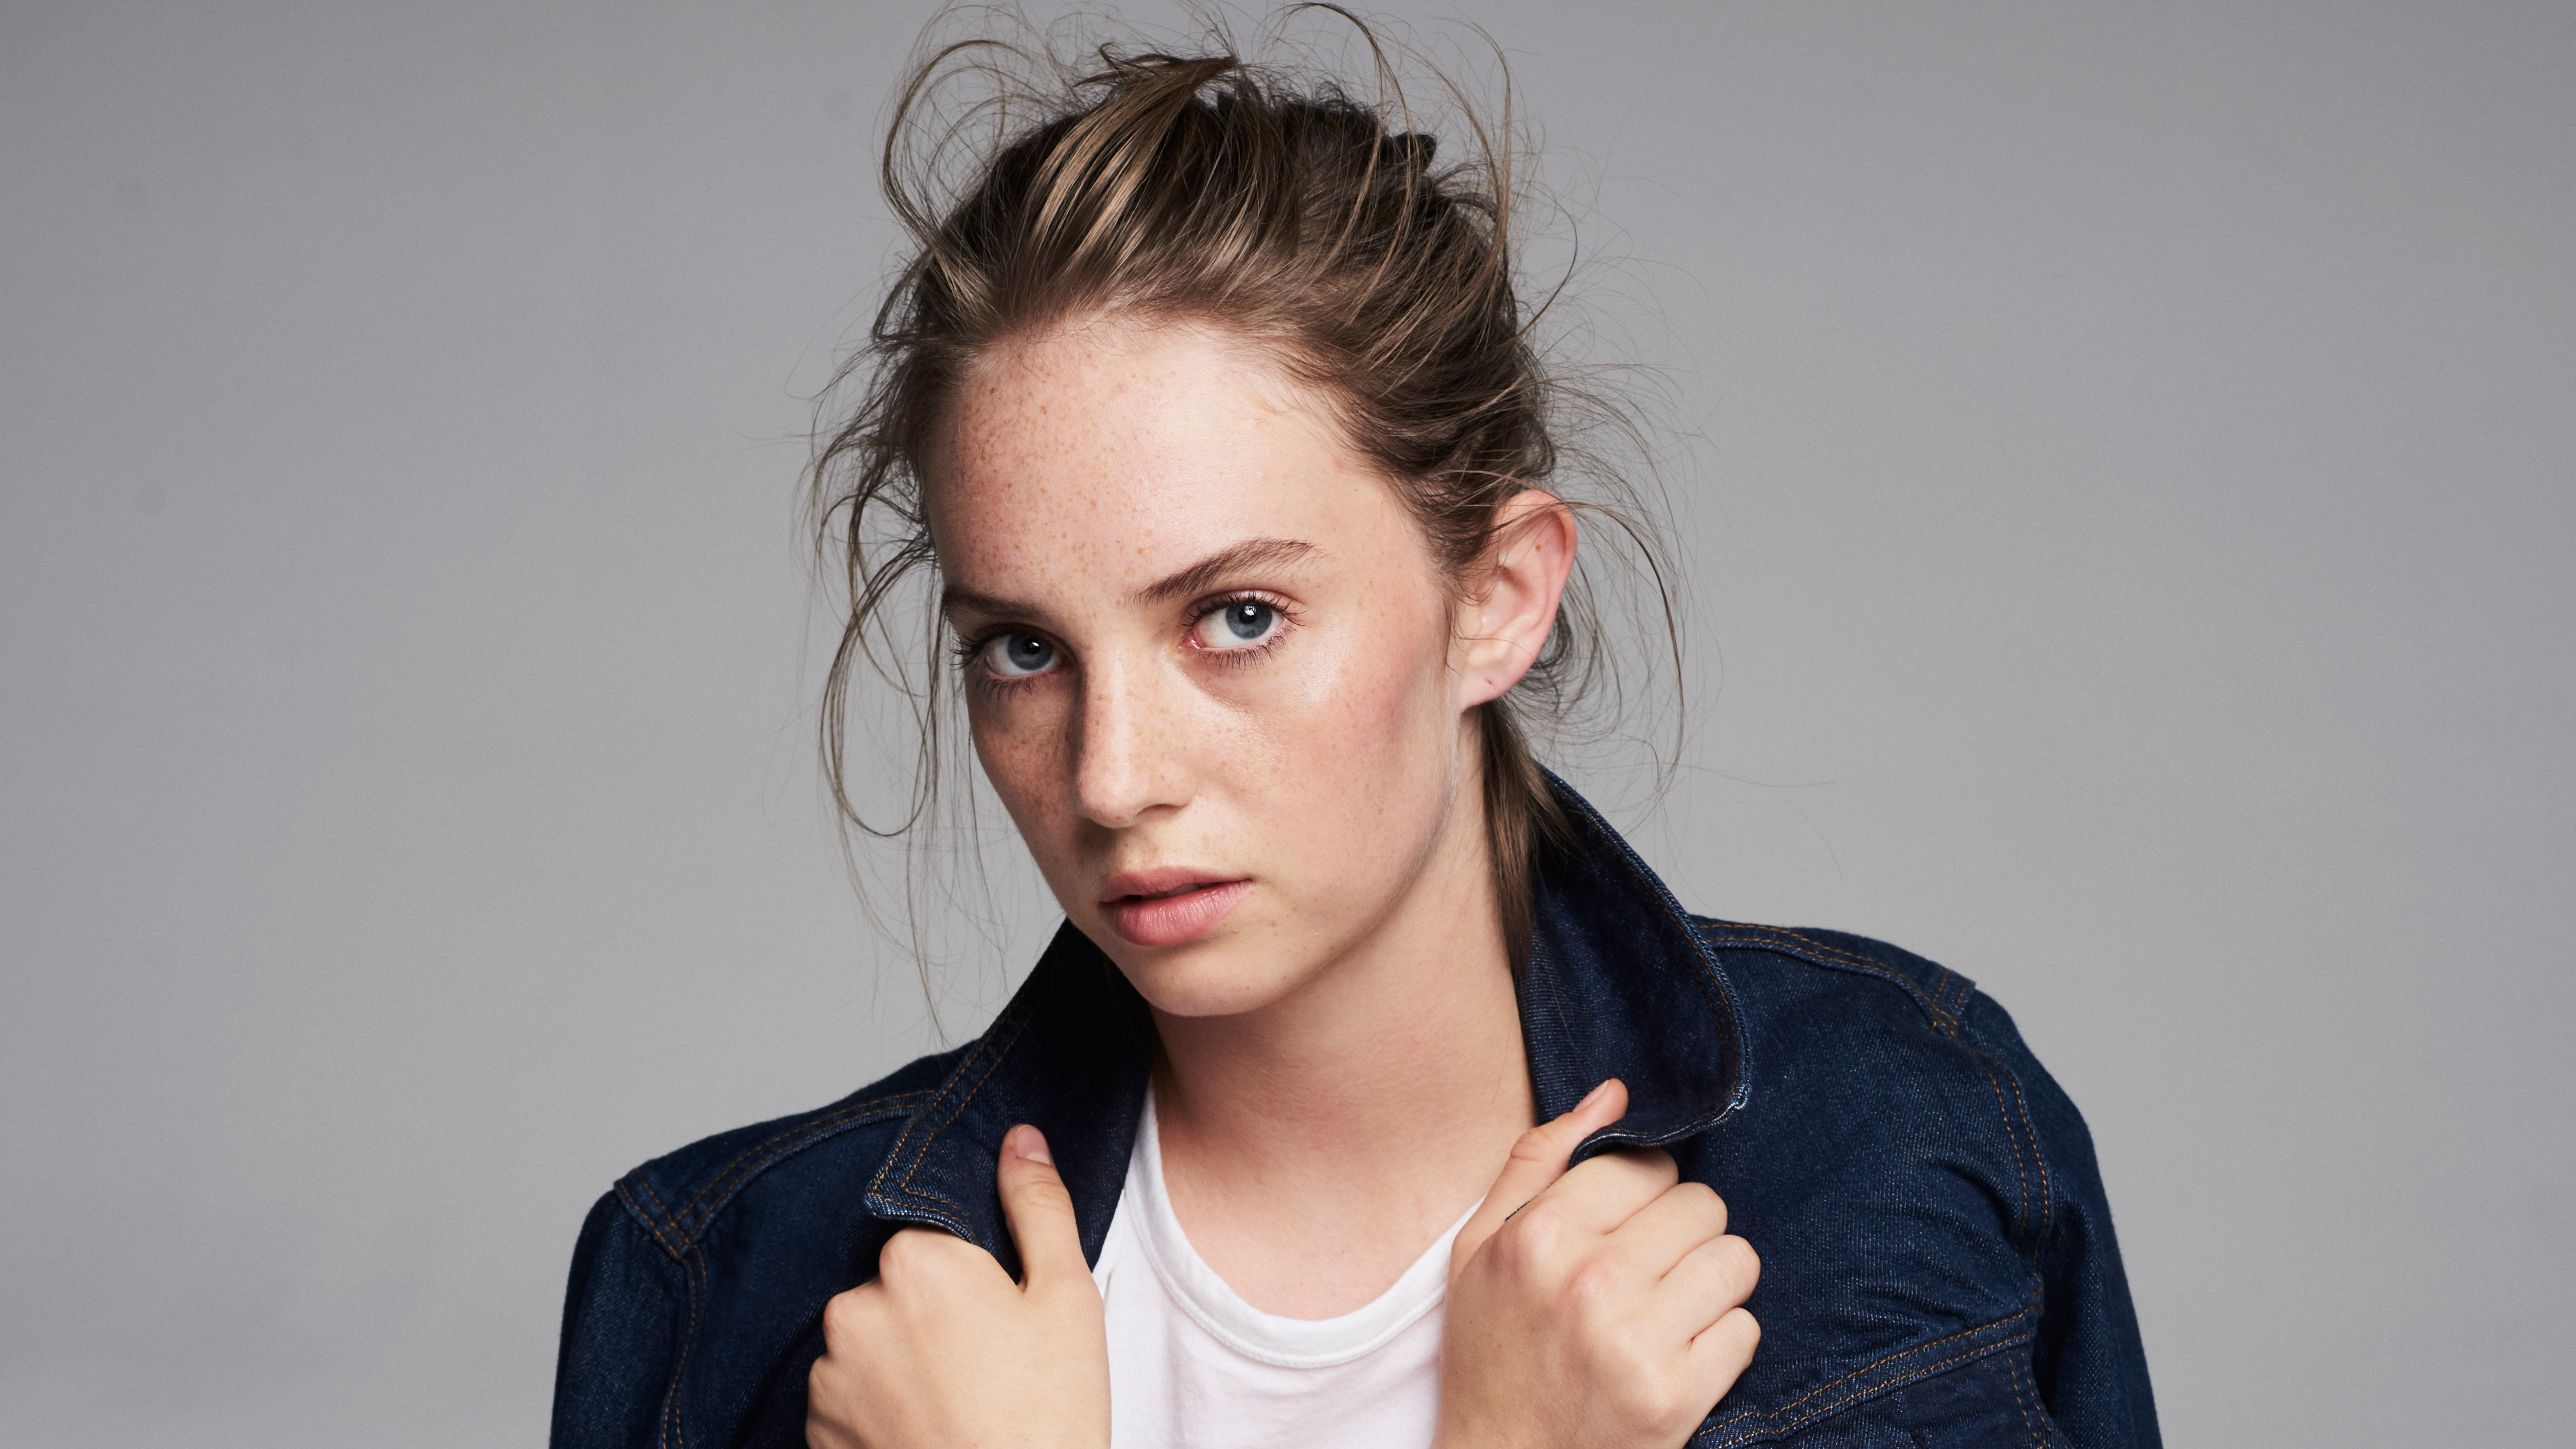 Discover more than 63 maya hawke wallpaper best - in.cdgdbentre